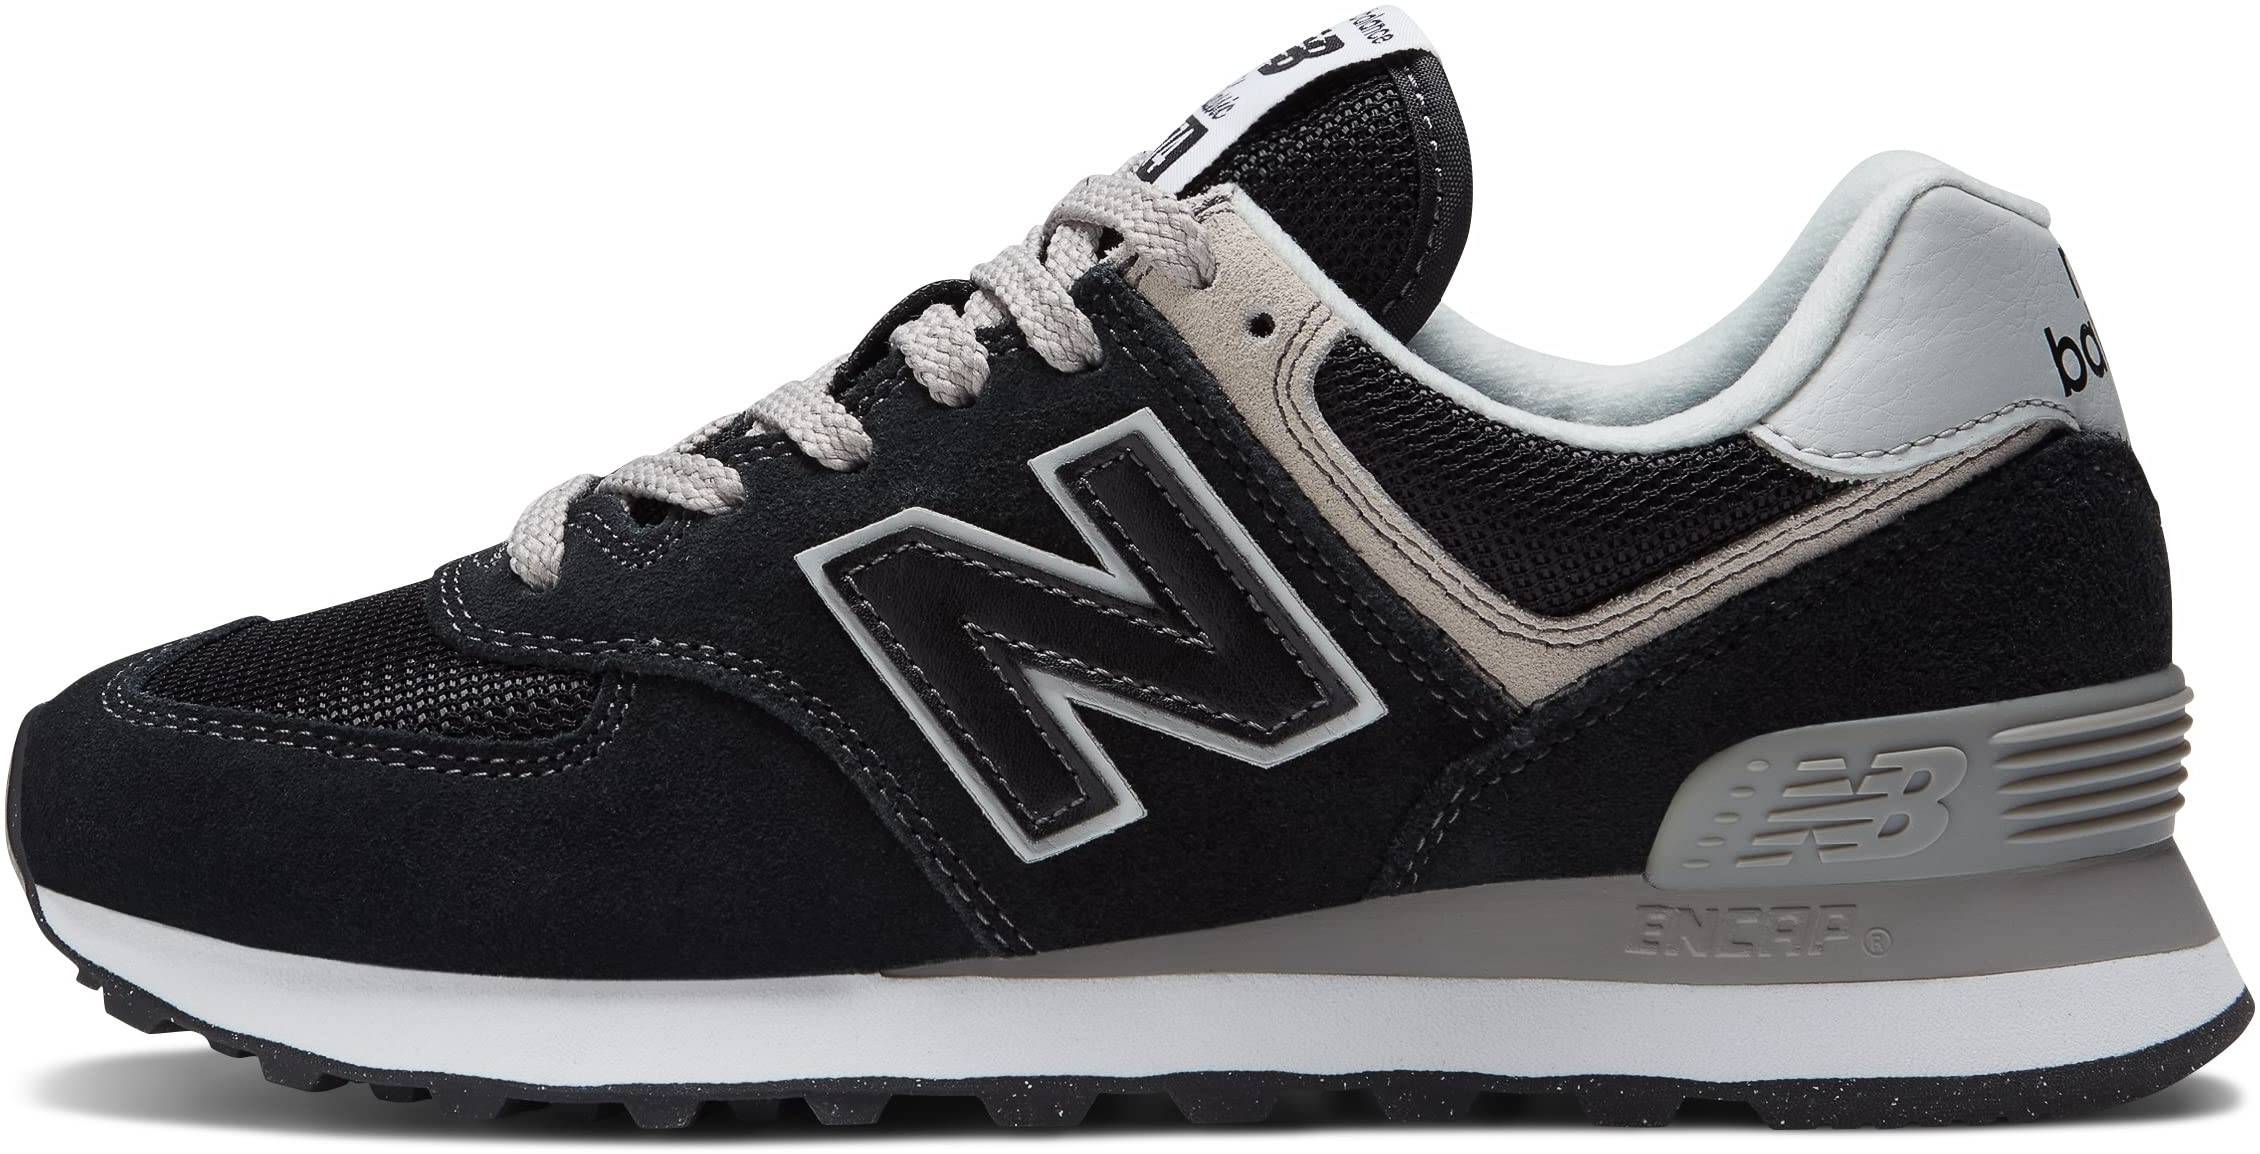 New Balance Rubber 574 Evergreen Pack Trainers in Grey - Save 54% Grey Womens Trainers New Balance Trainers 